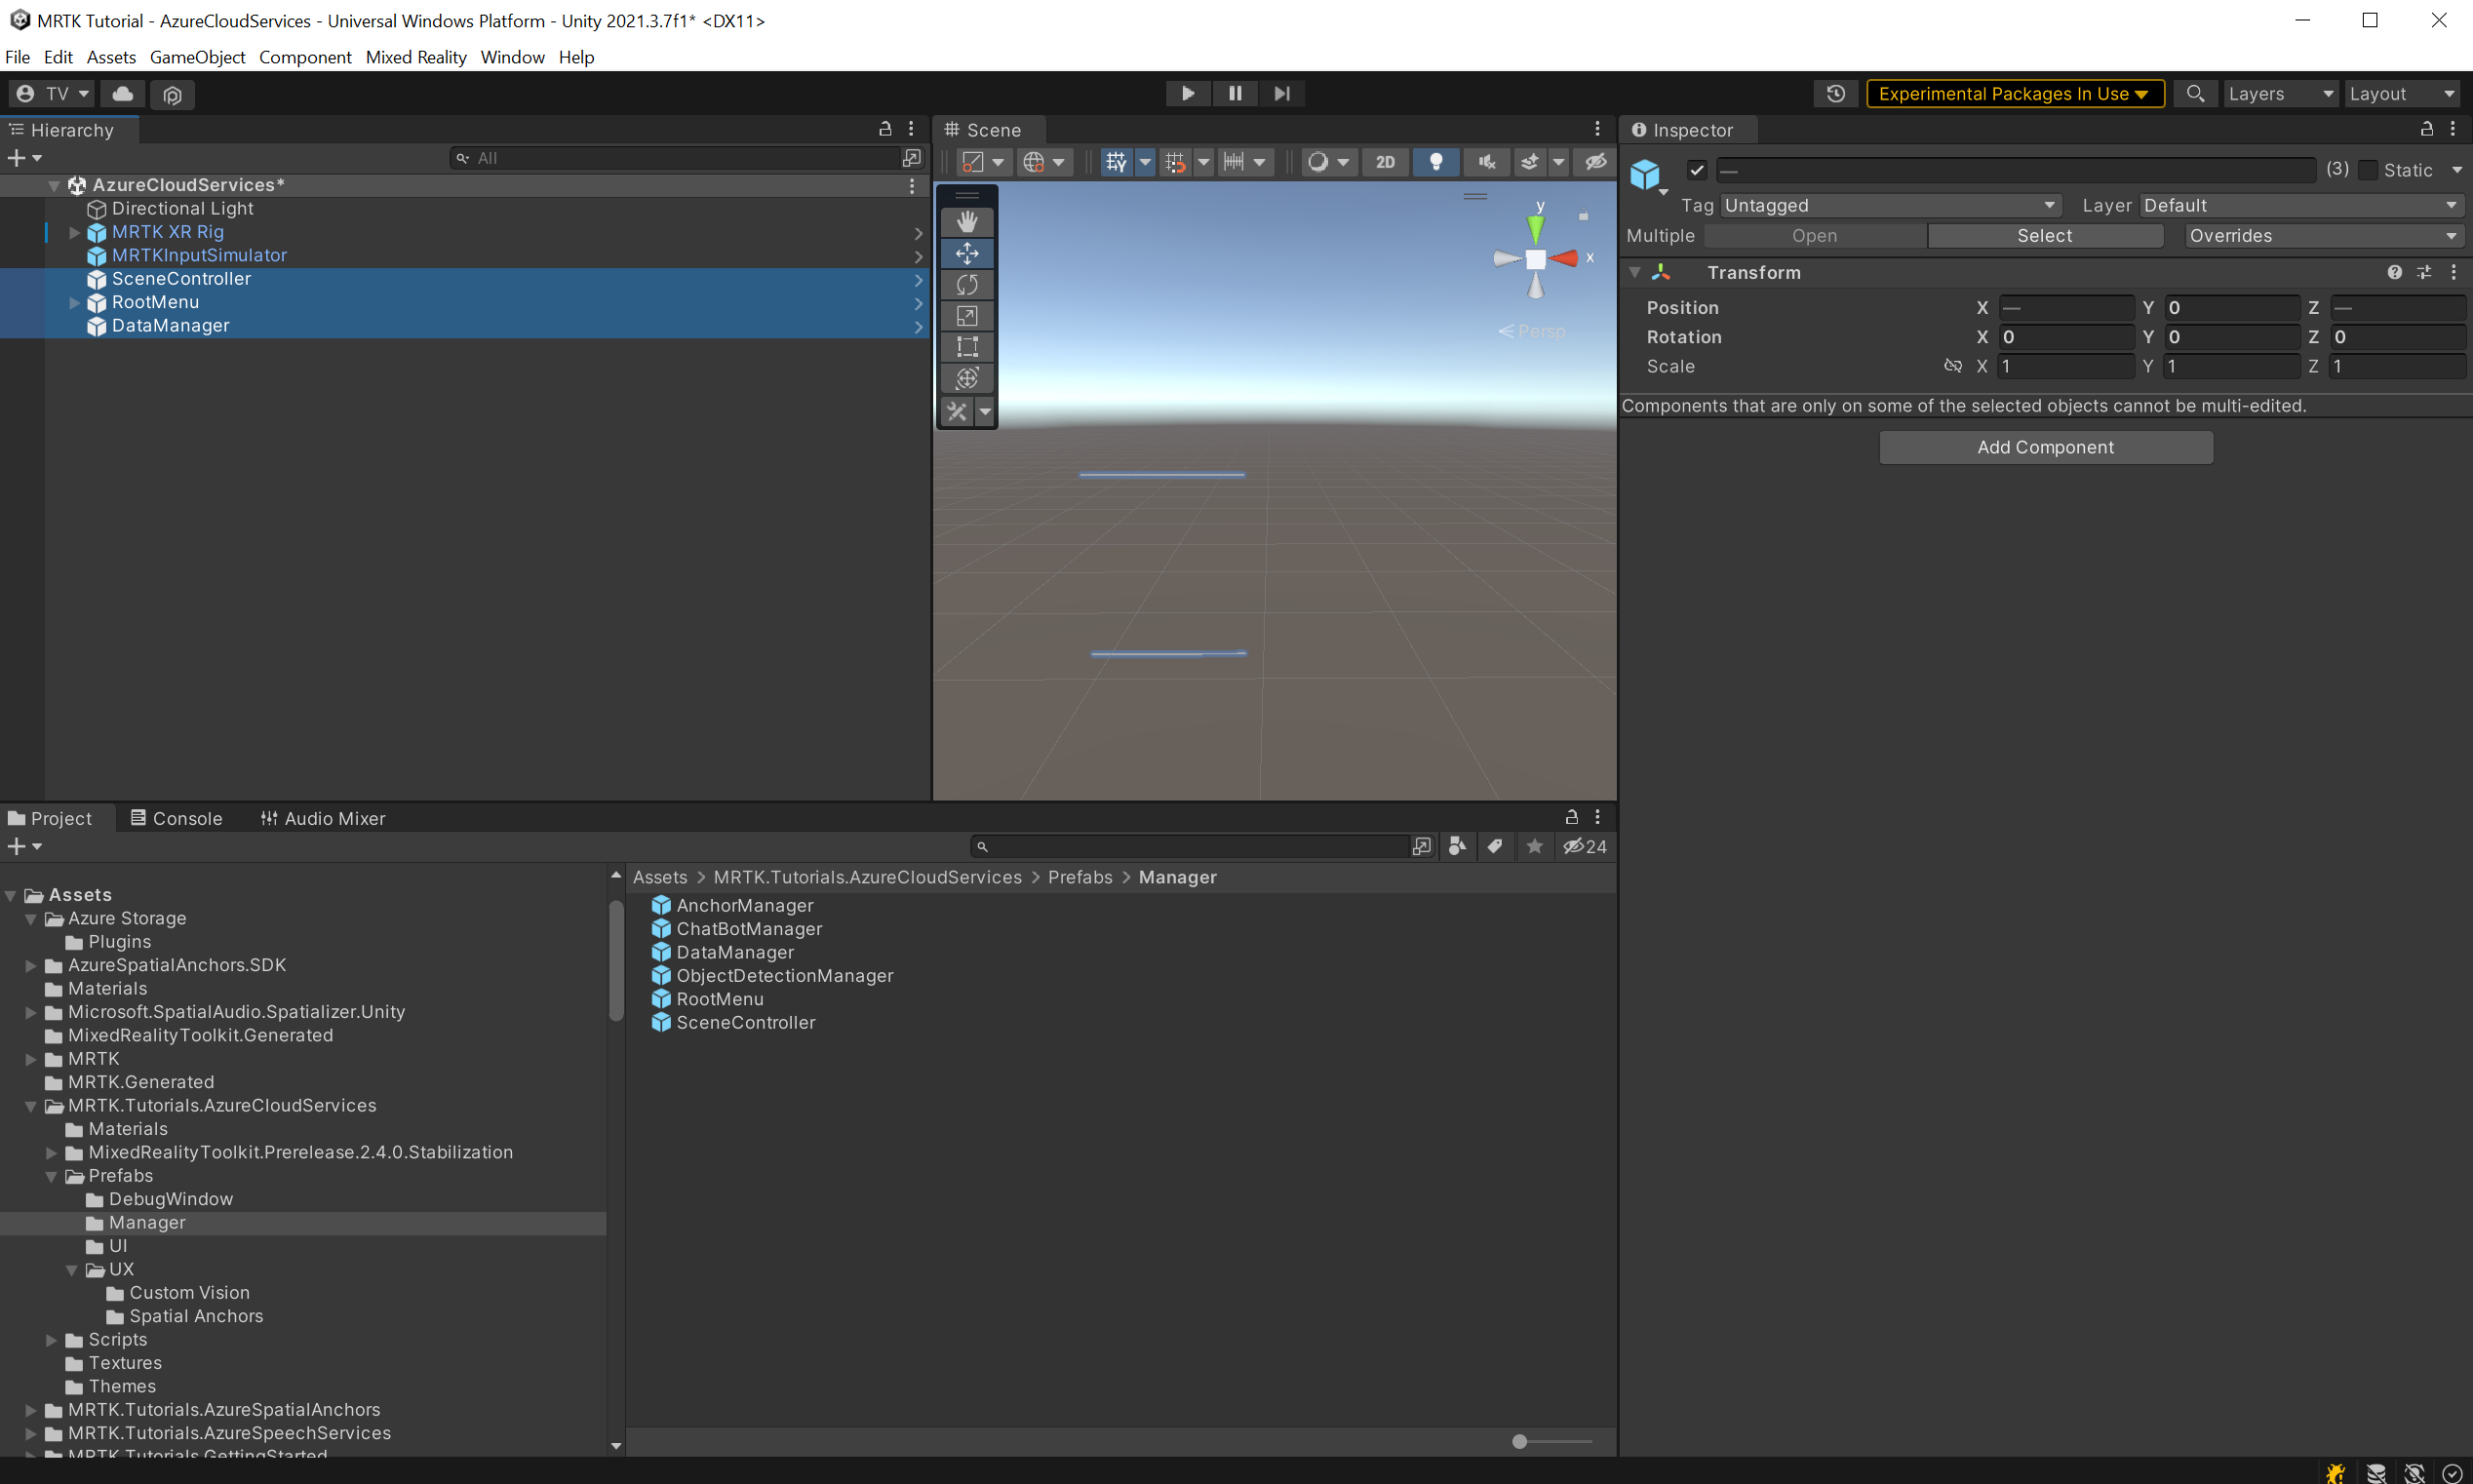 Screenshot of Unity with newly added SceneController, RootMenu and DataManager prefabs still selected.